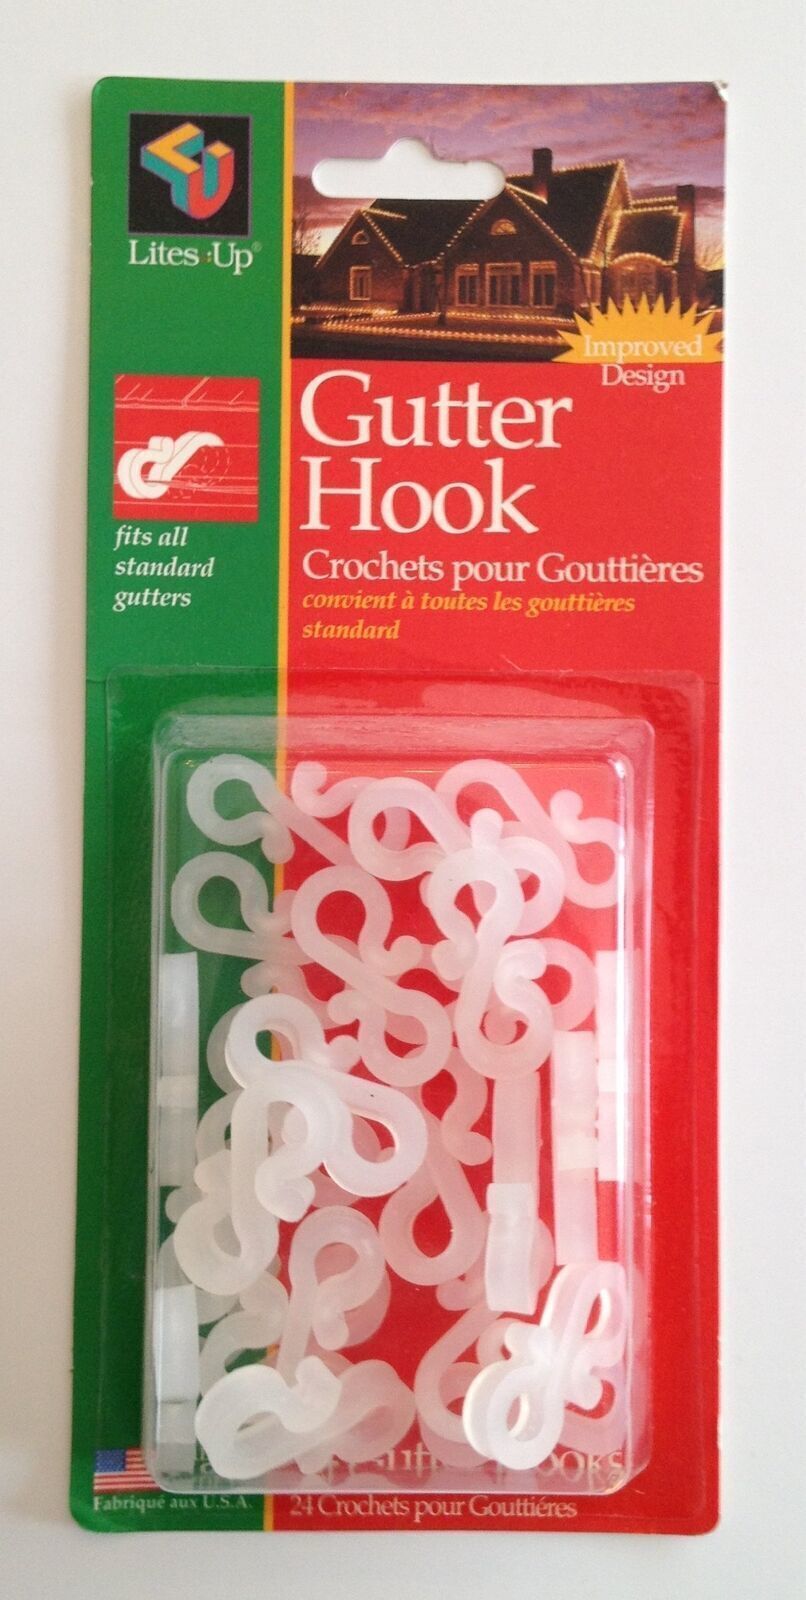 Gutter hooks 24 in one Package - Other